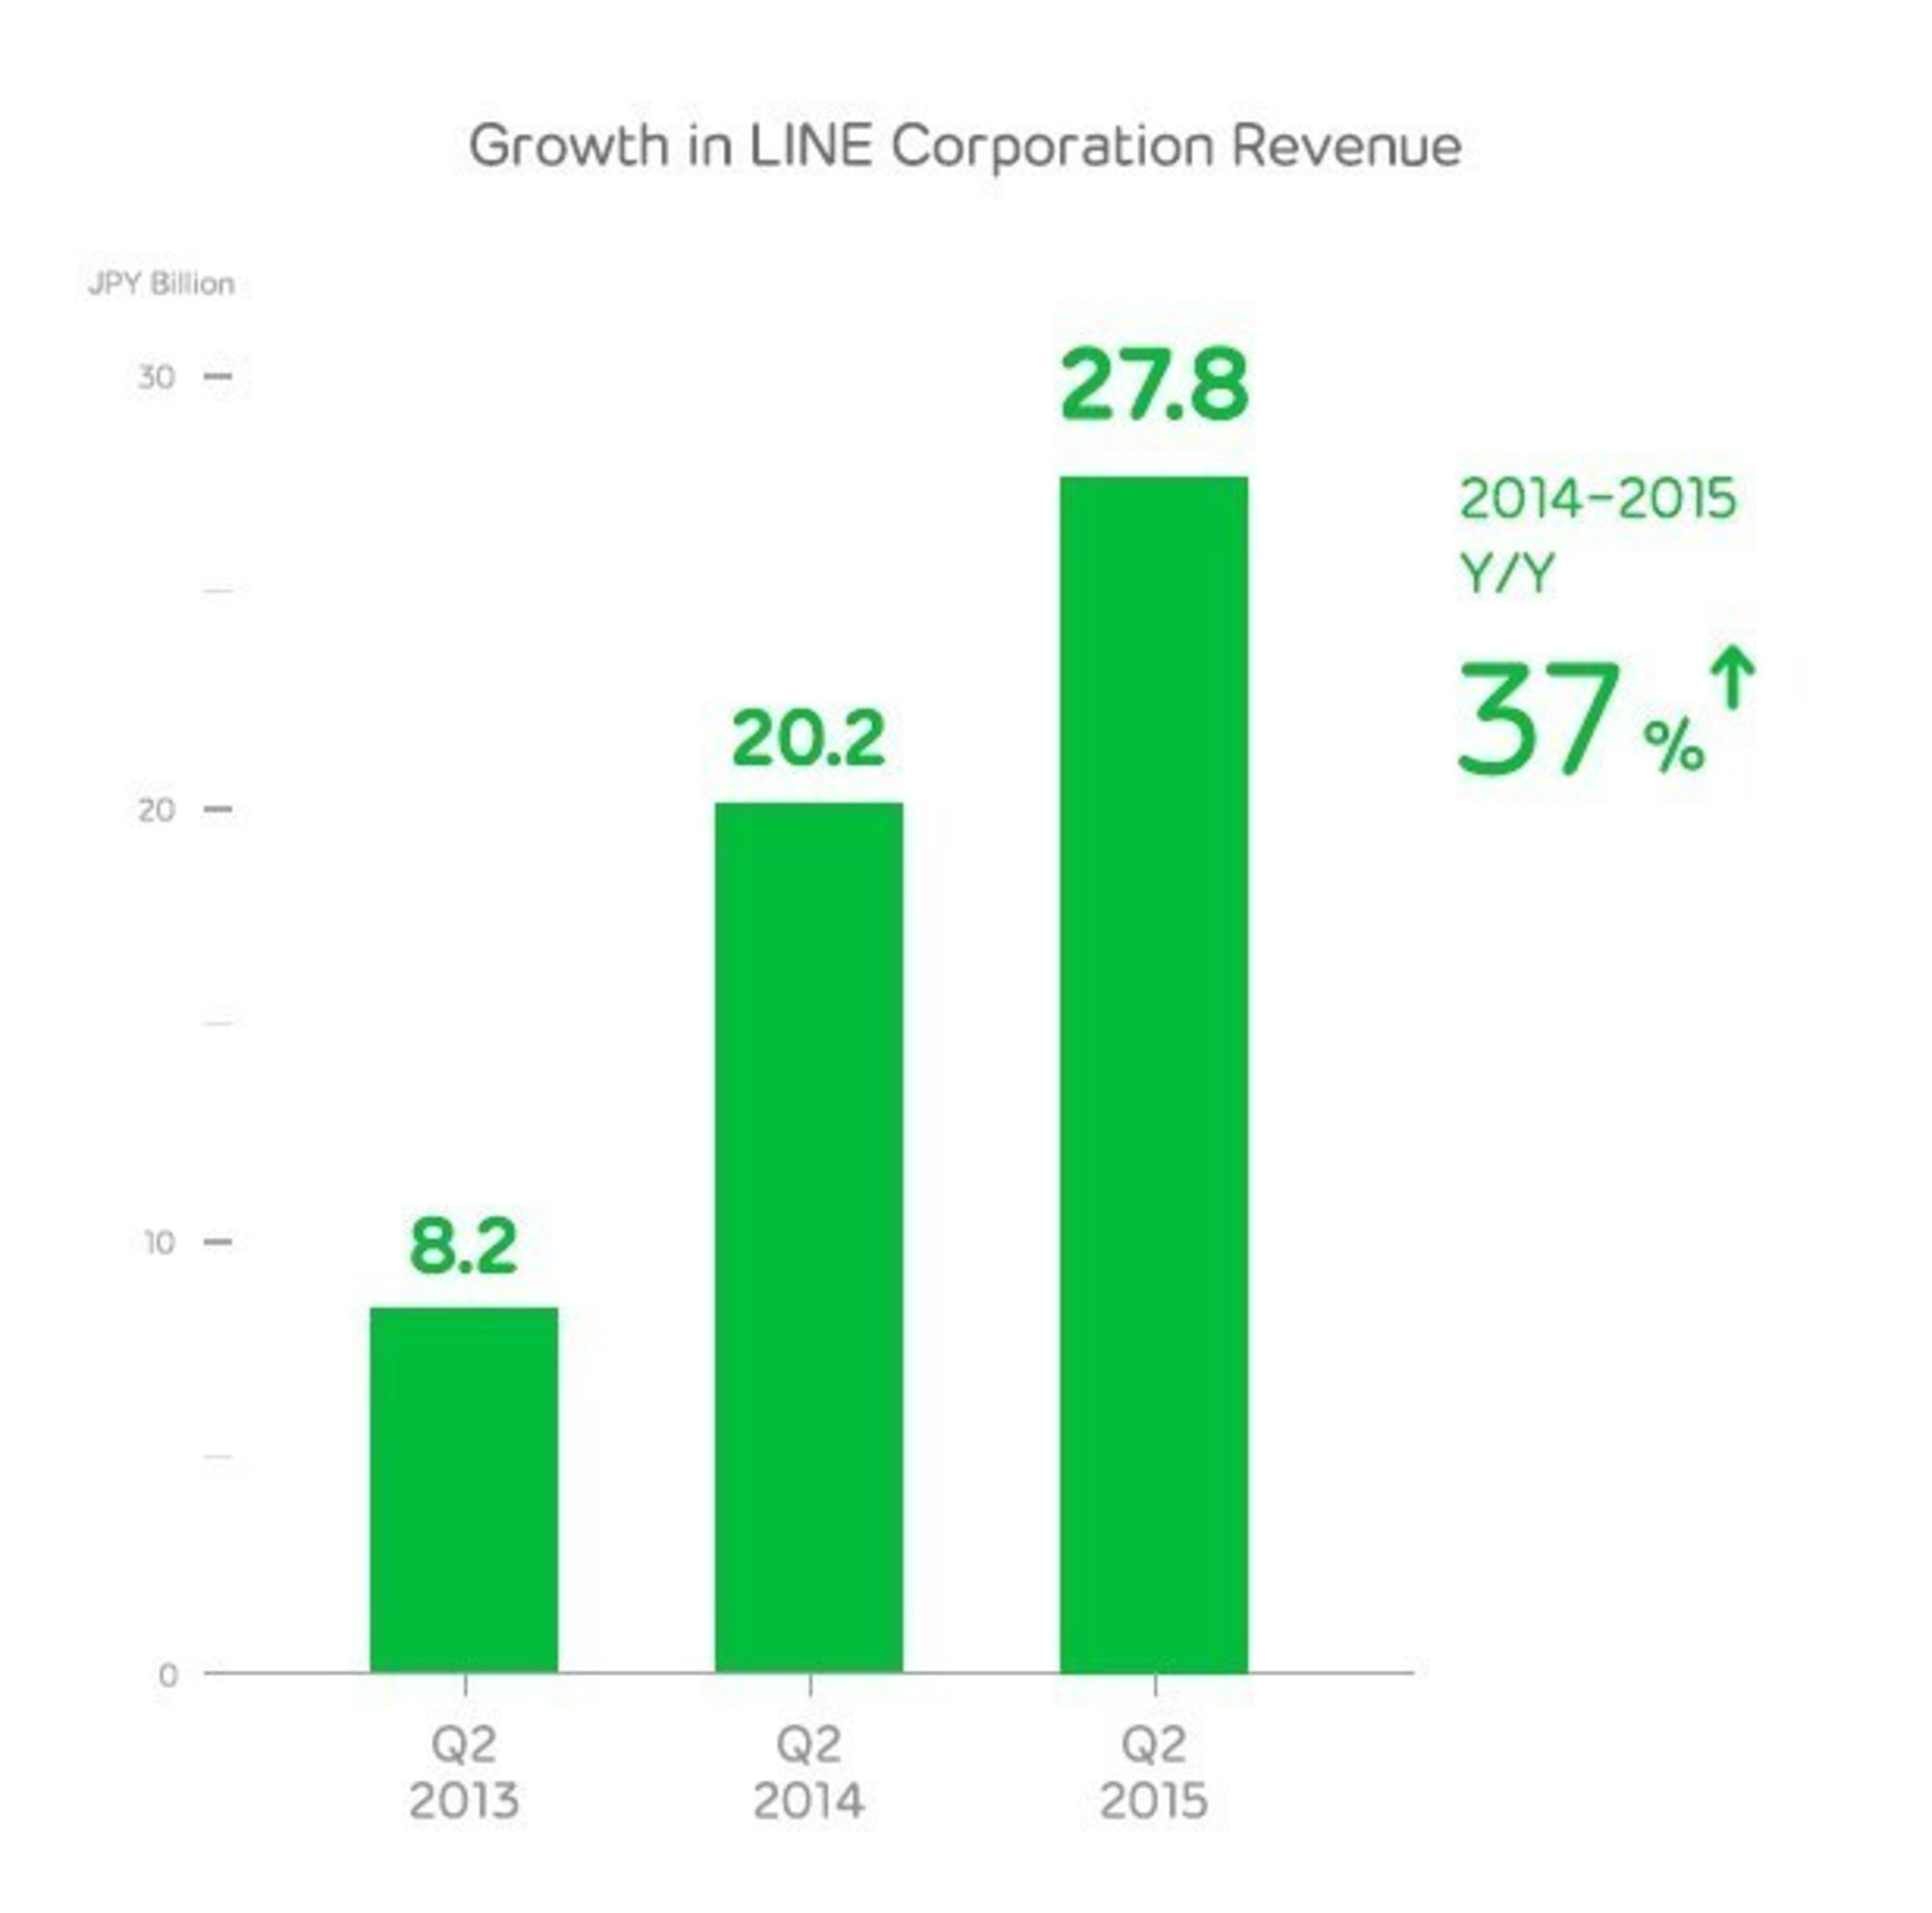 LINE Corporation, owner and operator of the free call and messaging app LINE, today announced their Q2 (April-June) earnings for 2015.